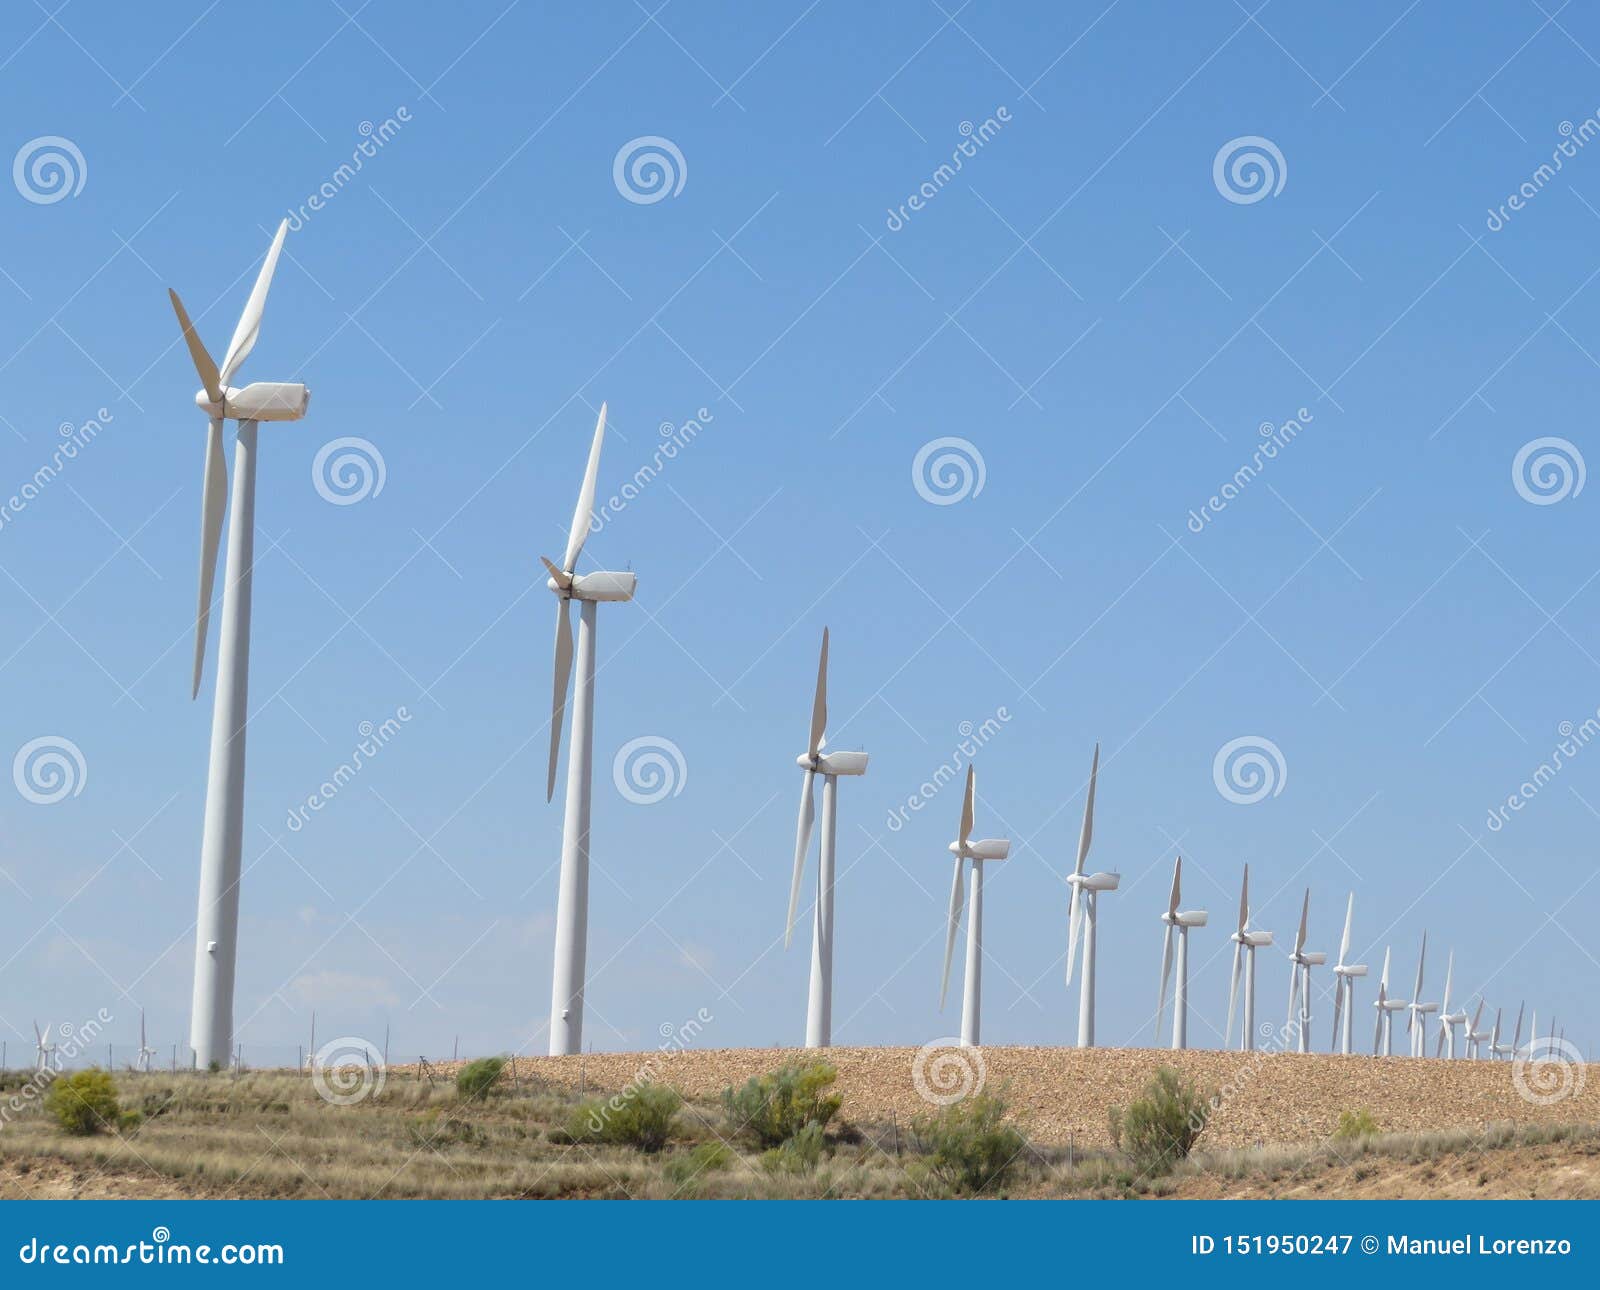 beautiful wind turbines ready to convert the air the energy